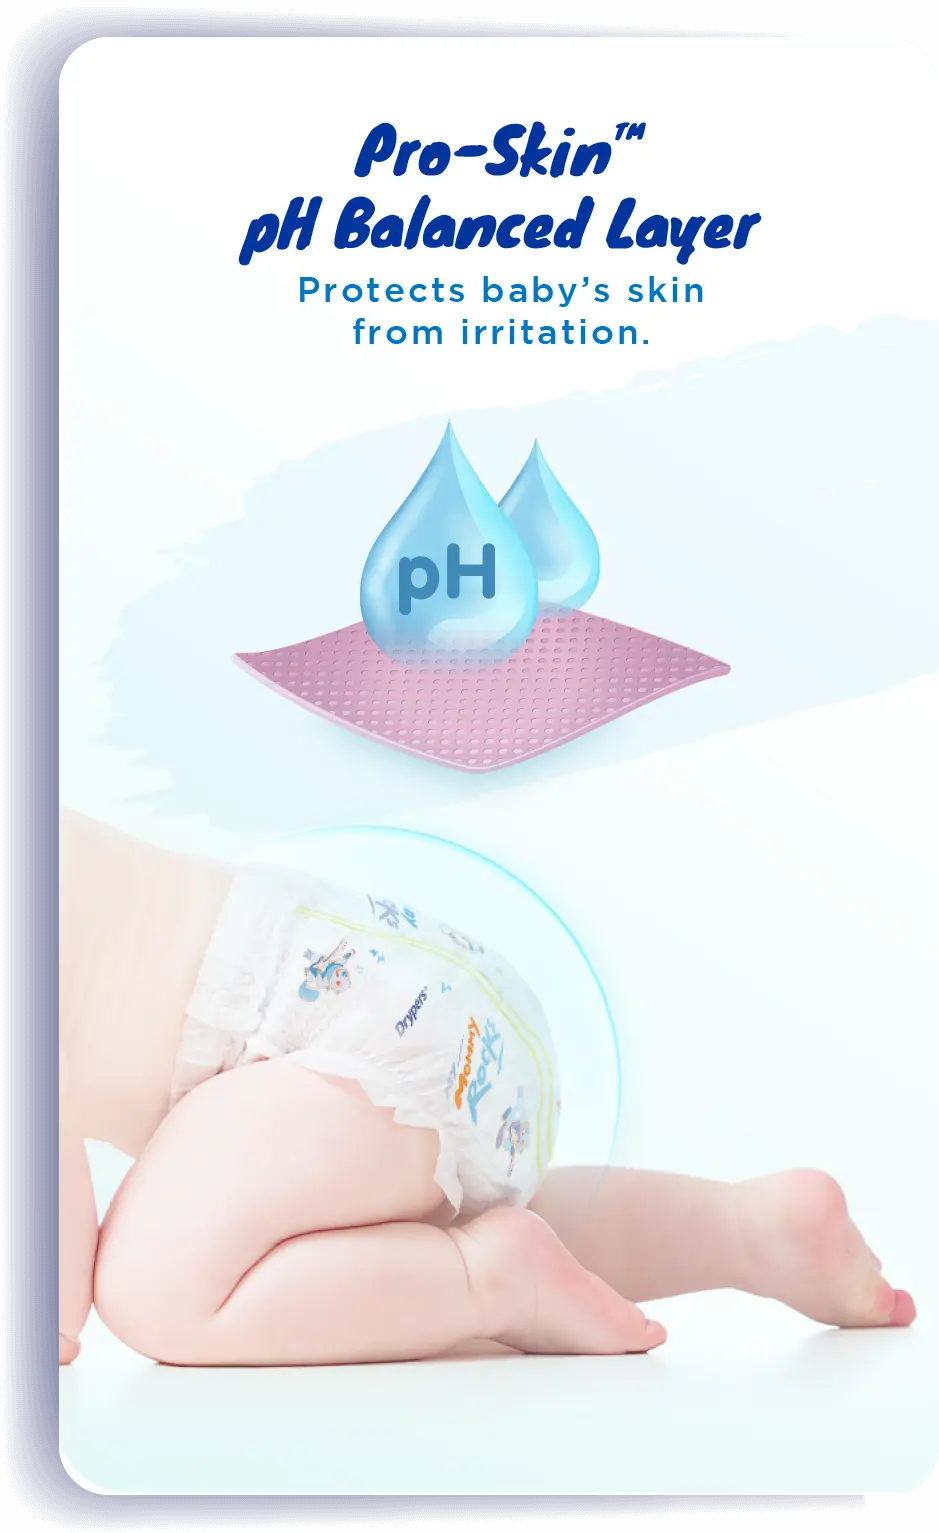 Pro-Skin™ - pH Balanced Layer: Protects baby's skin from irritation.